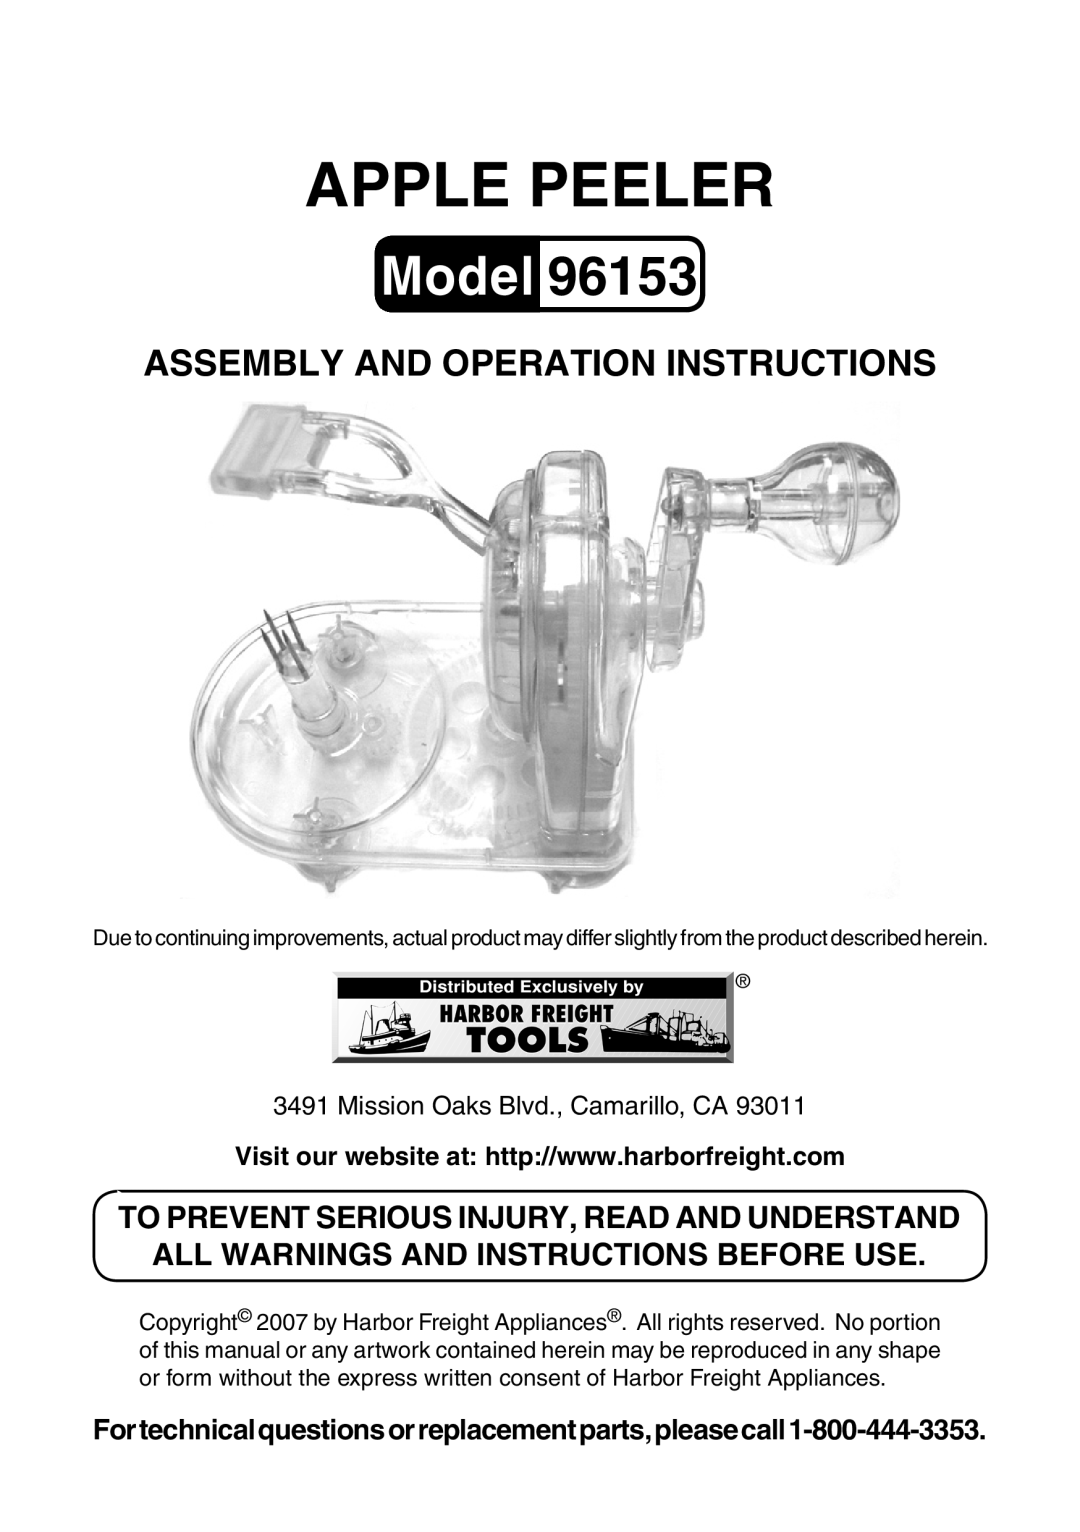 Harbor Freight Tools 96153 manual Save this manual, Apple peeler, Model, Assembly And Operation Instructions 